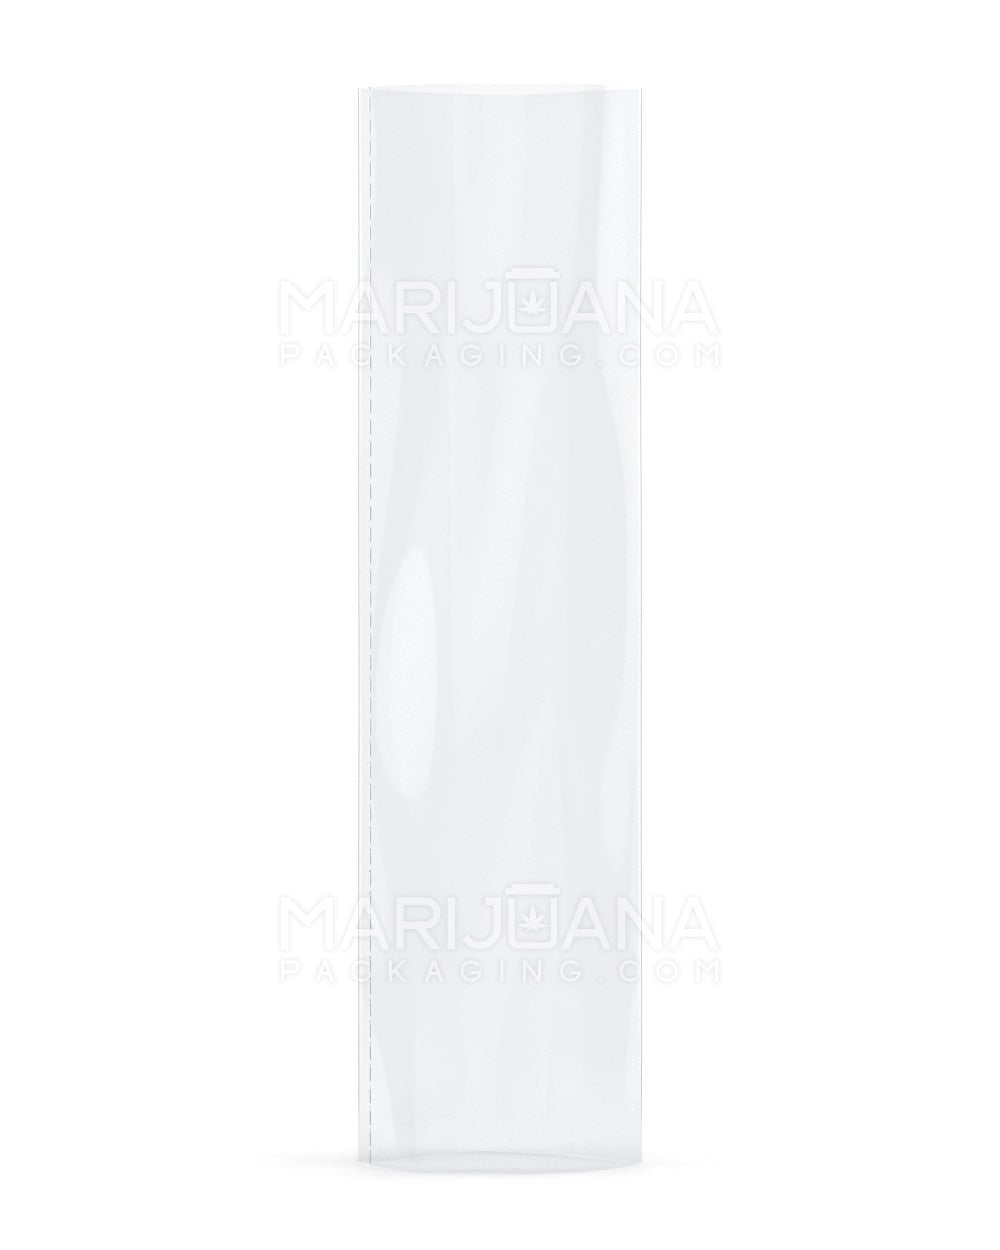 Tamper Evident | Heat Seal Shrink Bands for Pre-Roll Tubes | 120mm - Clear Plastic - 1000 Count - 5